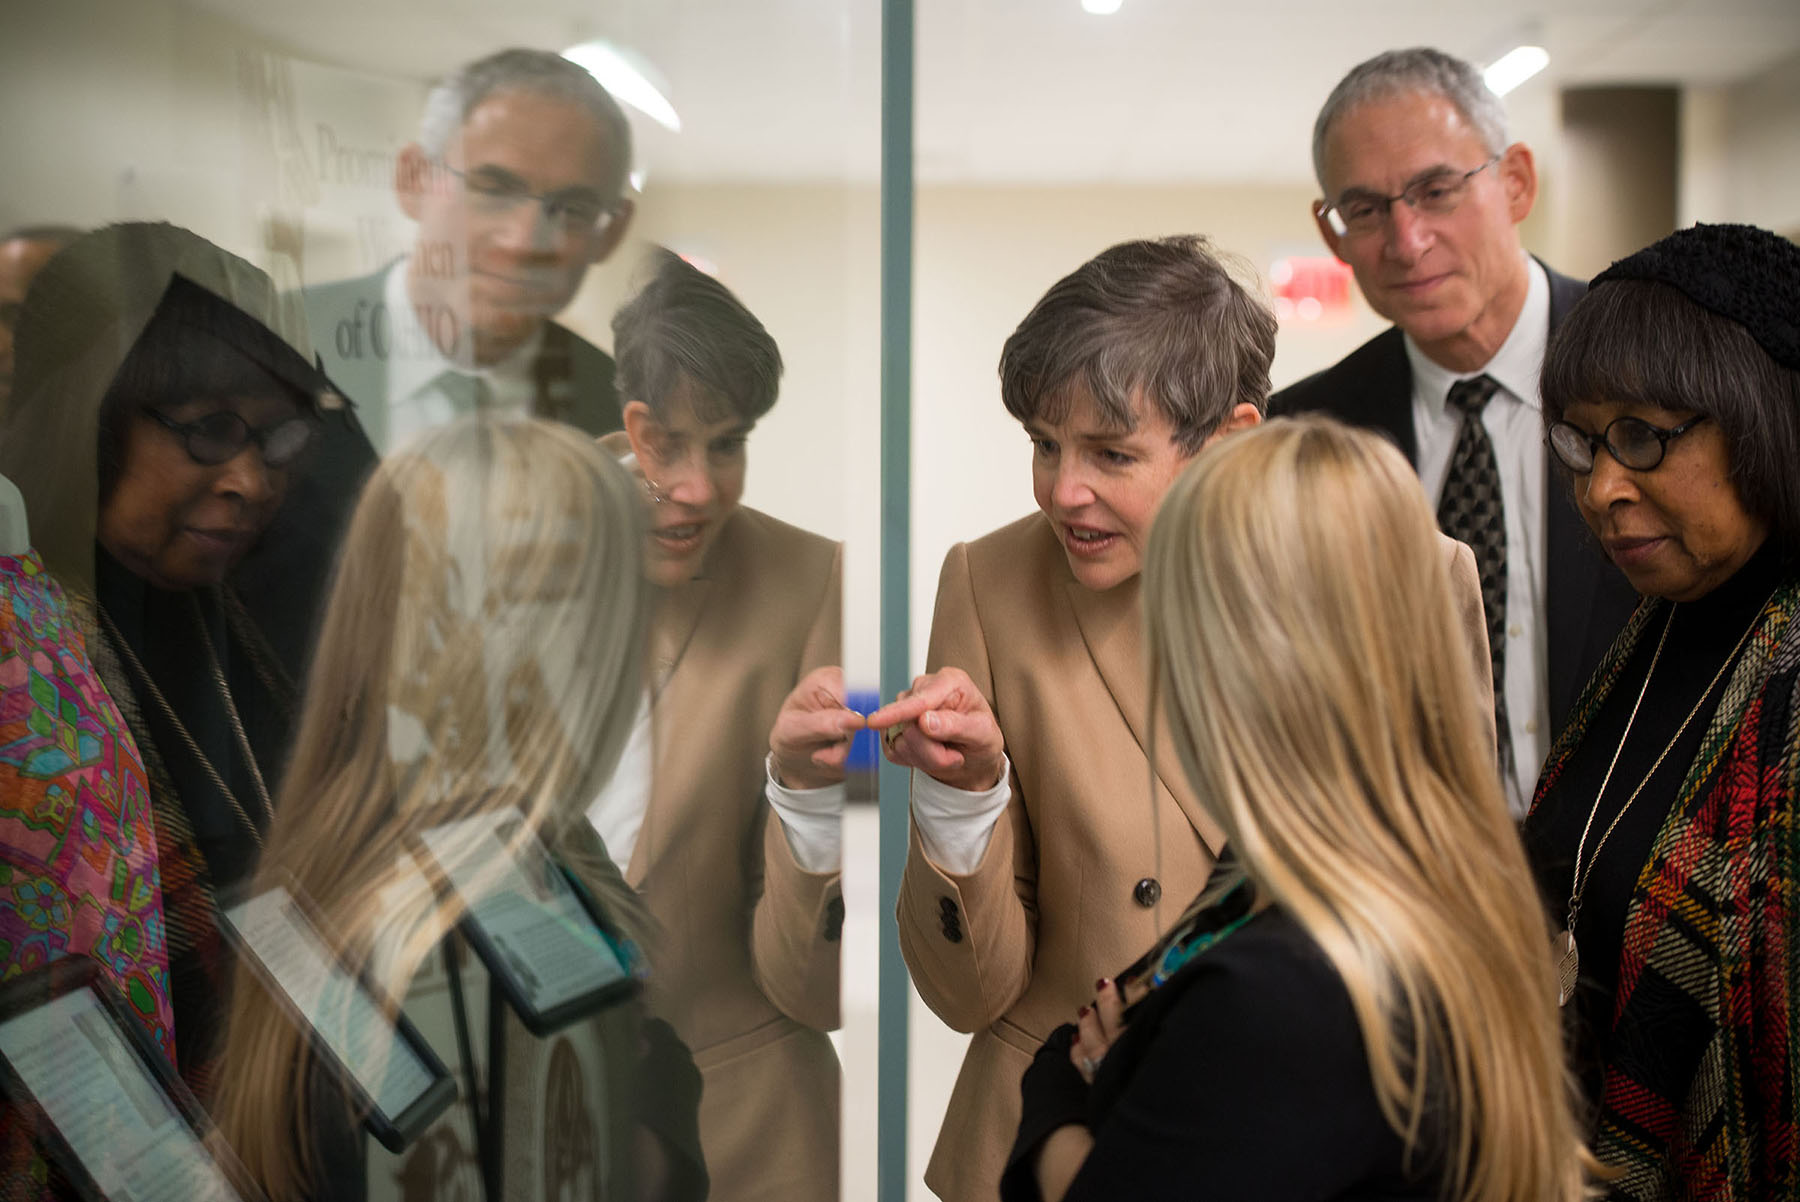 a woman points to an item in a glass display case while a man and two women observe